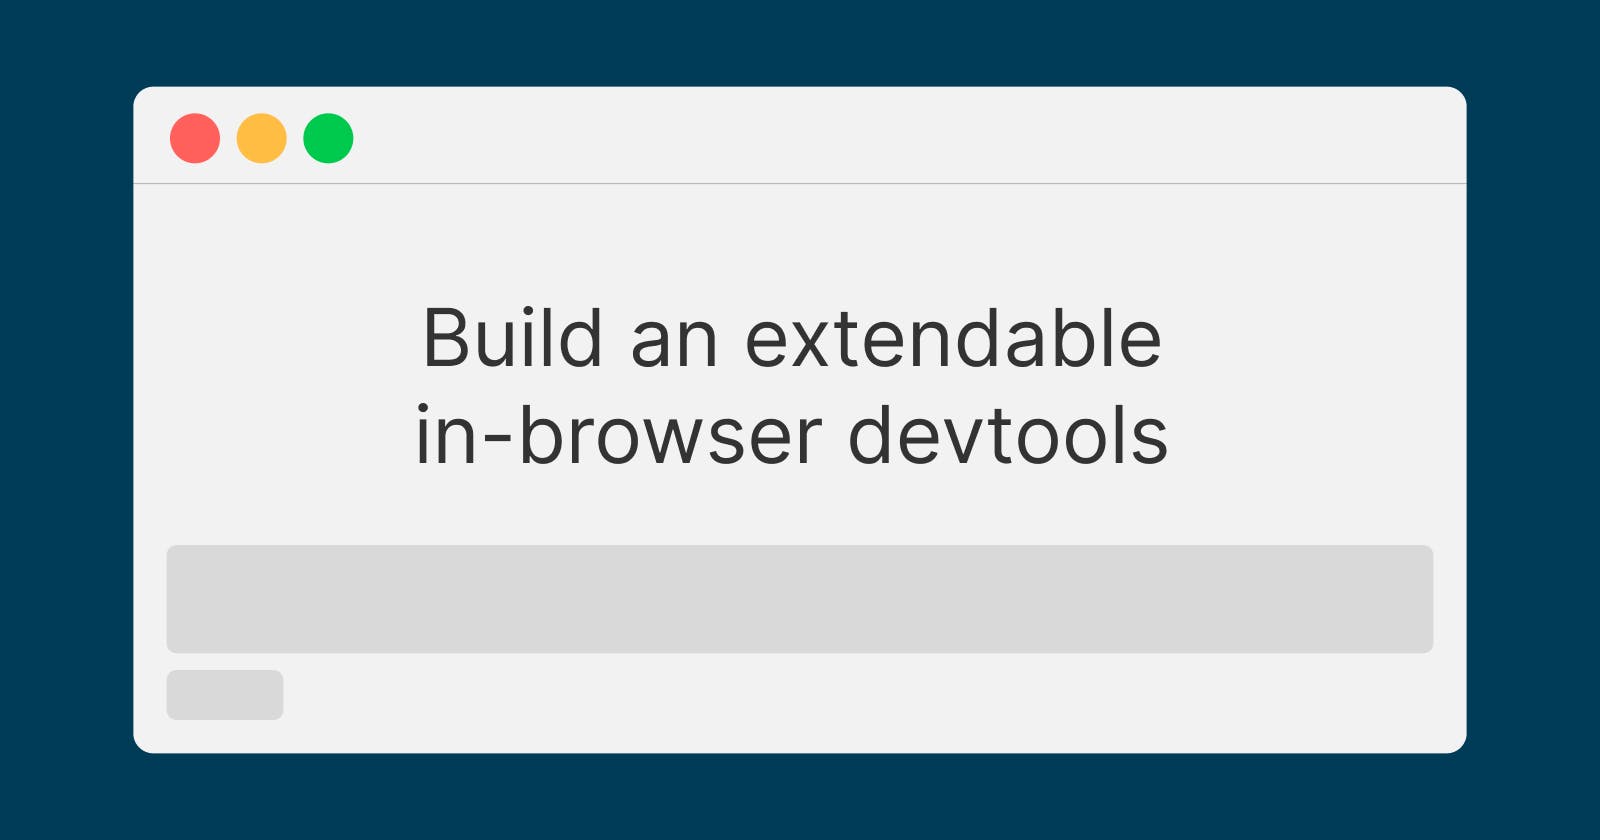 Build an extendable in-browser devtools